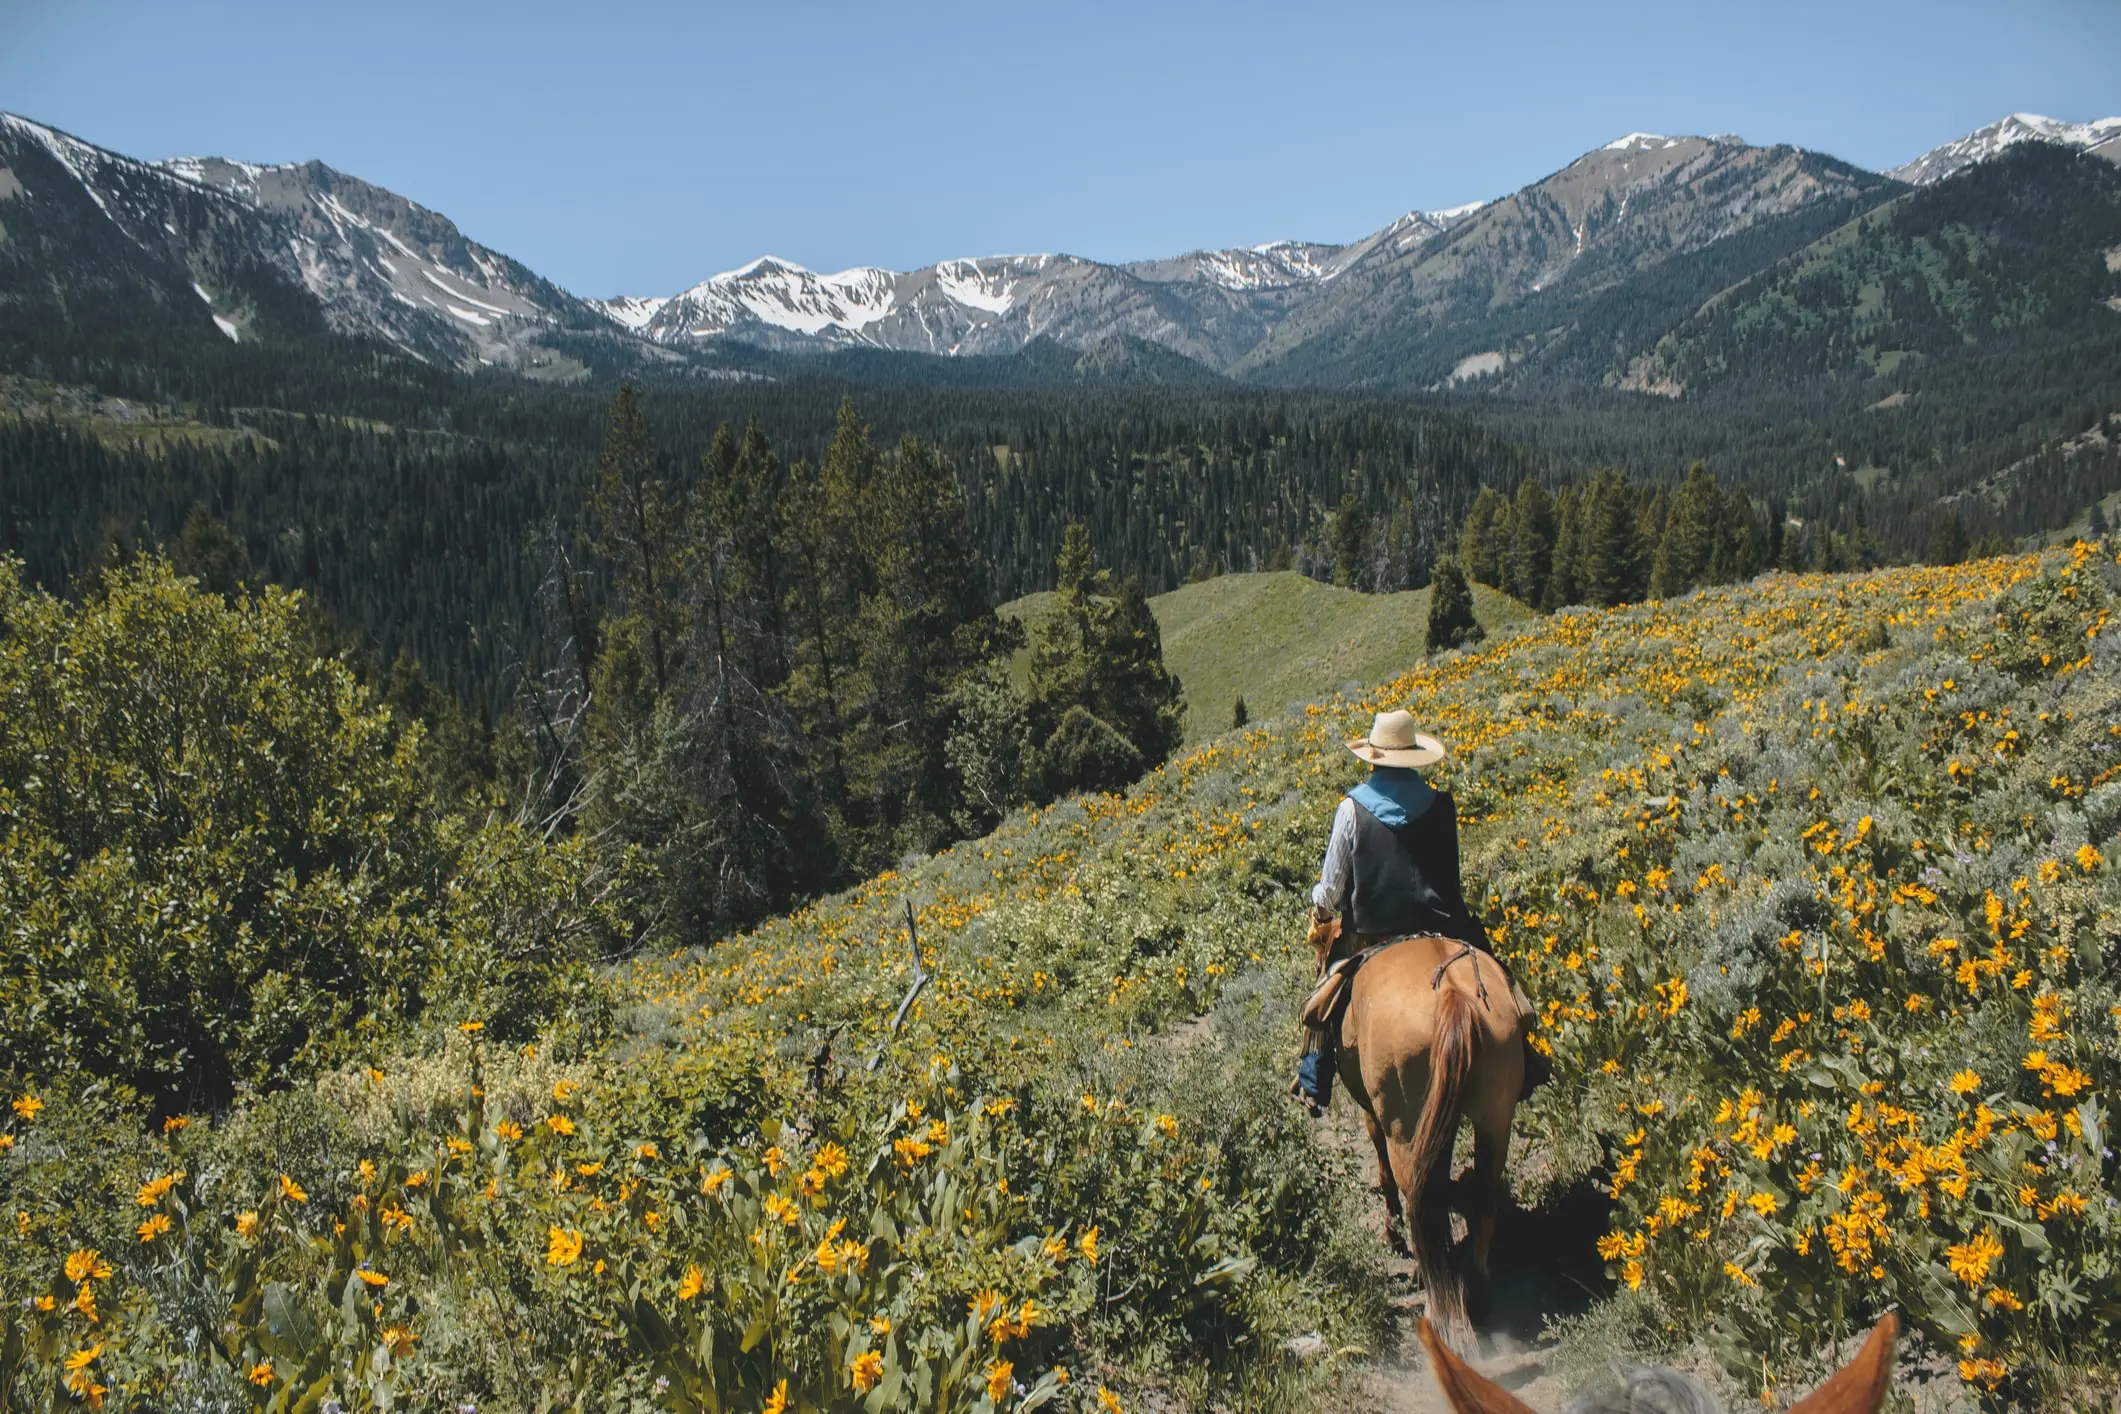 A person horseback riding through the mountains, surrounded by yellow flowers